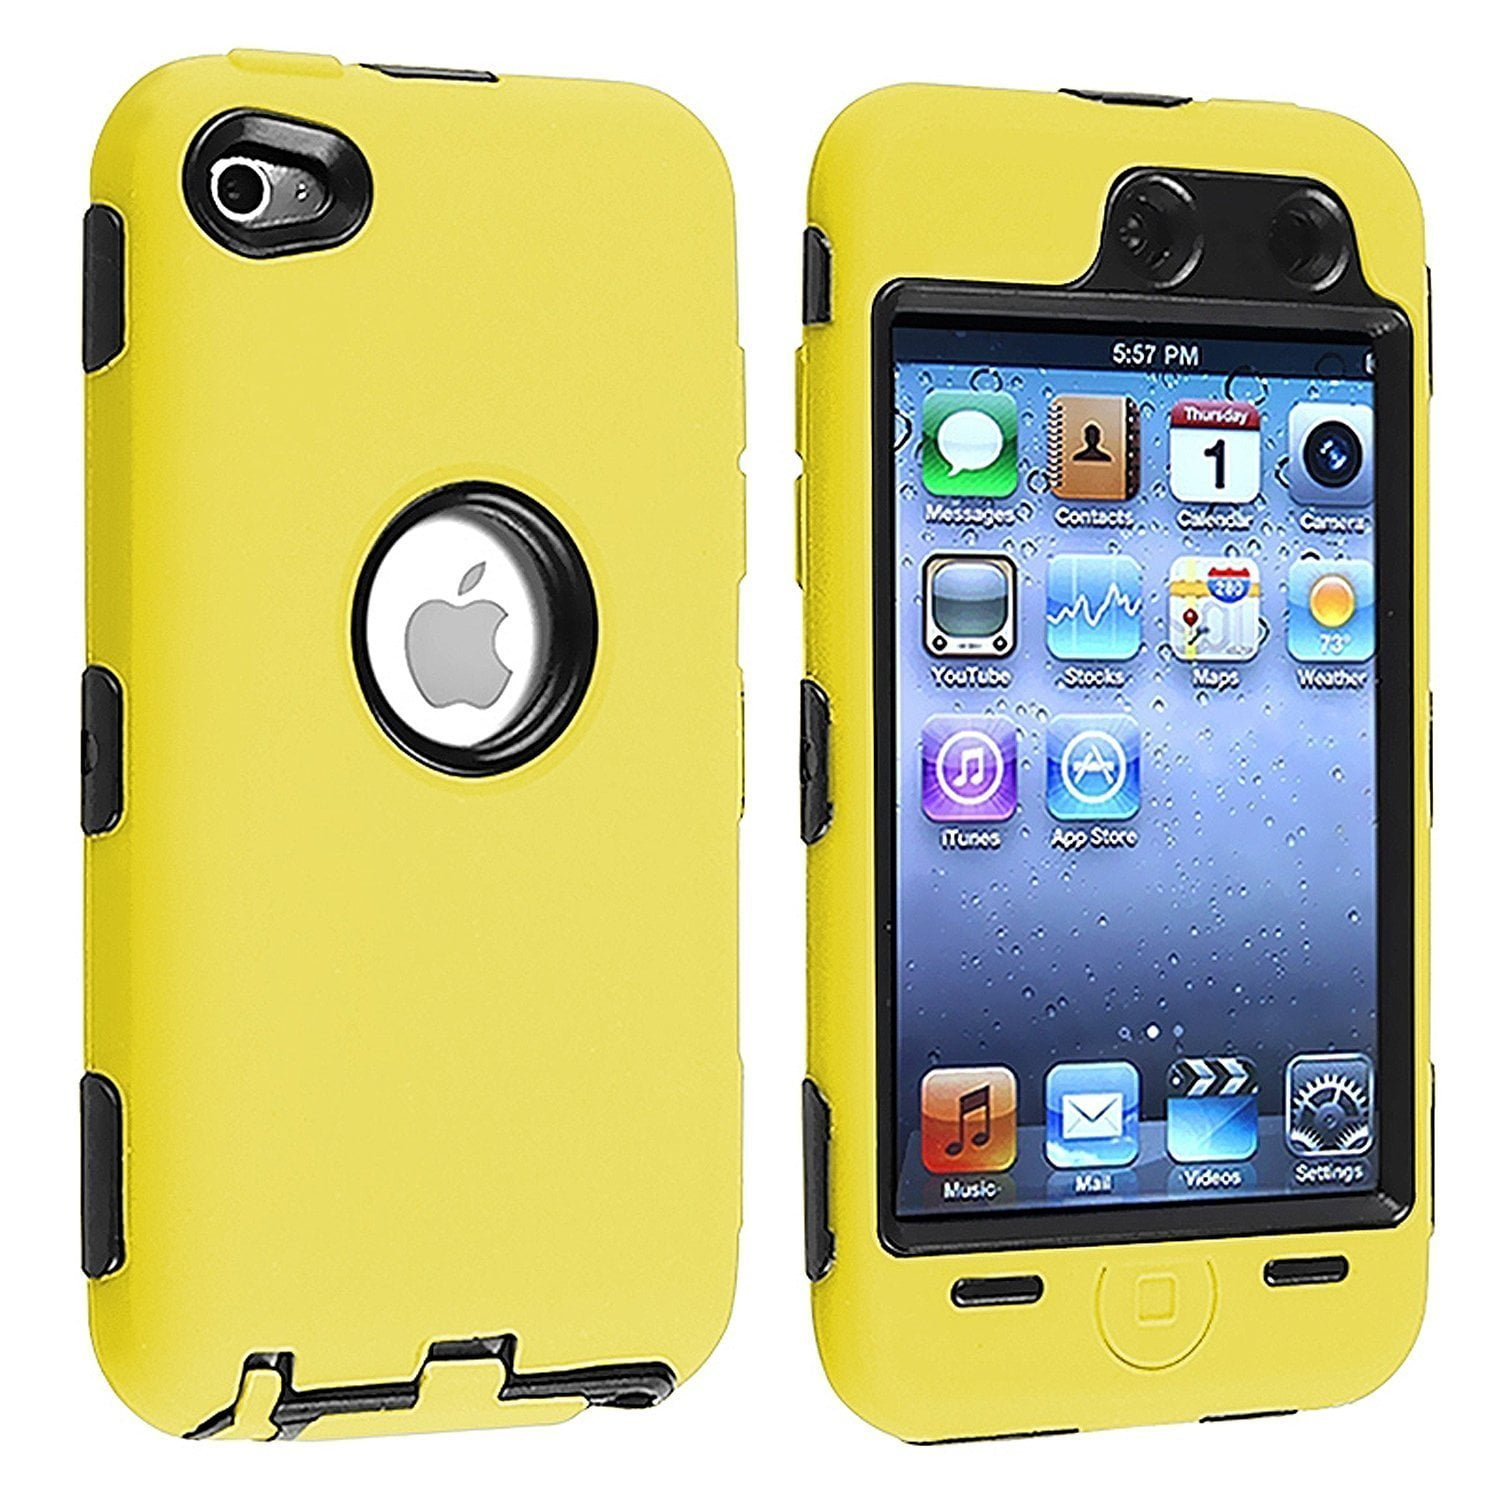 Orange Deluxe Hybrid Premium Rugged Hard Soft Case Skin Cover for iPod Touch 4th Generation 4G 4 